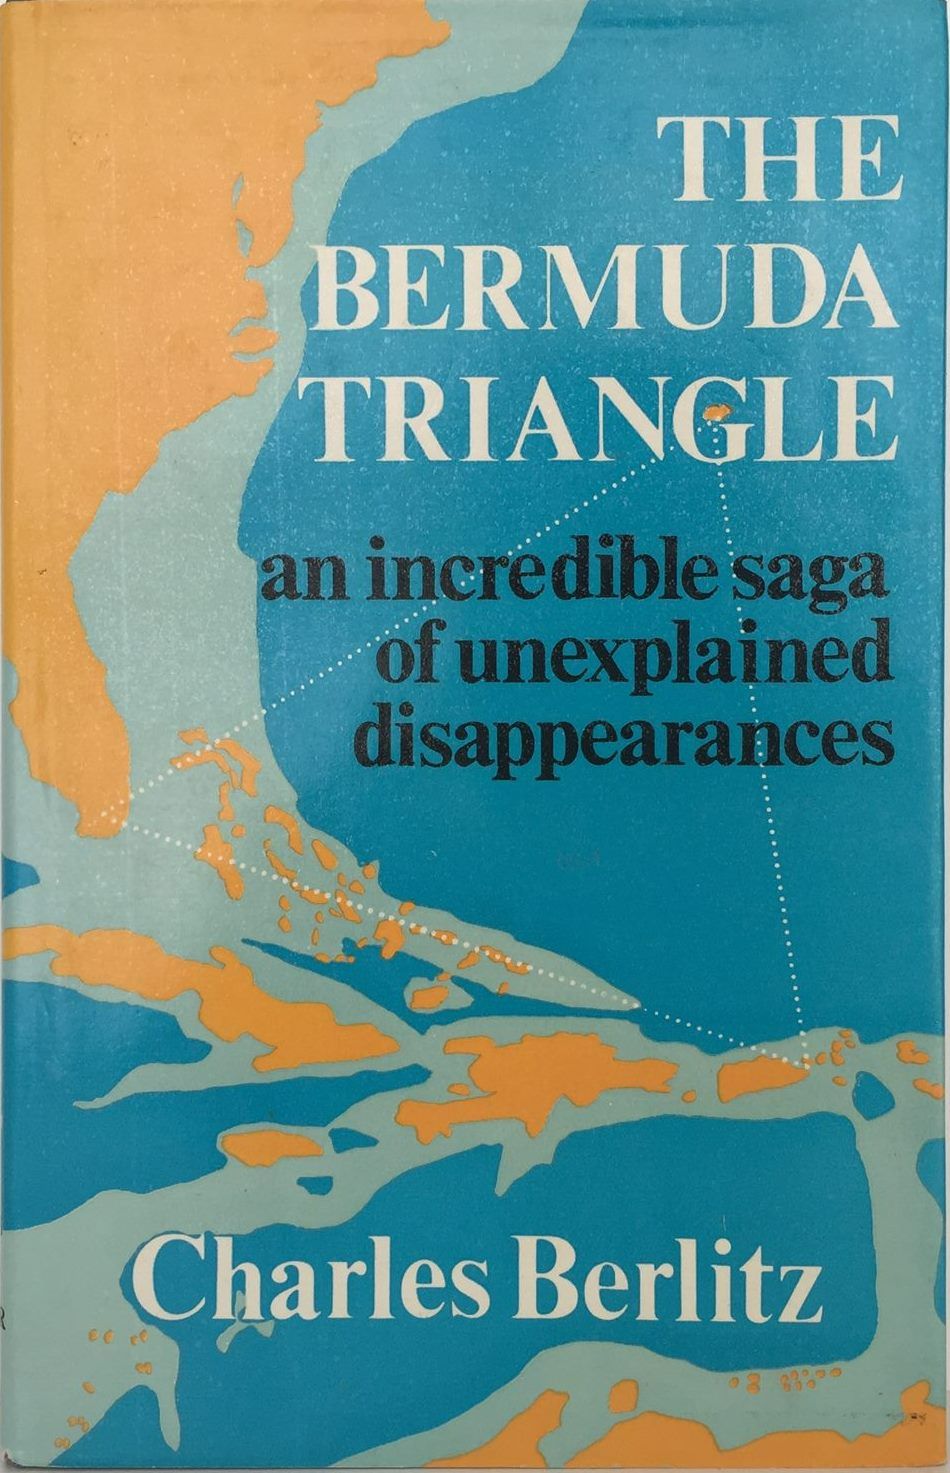 THE BERMUDA TRIANGLE: An incredible saga of unexplained disappearances